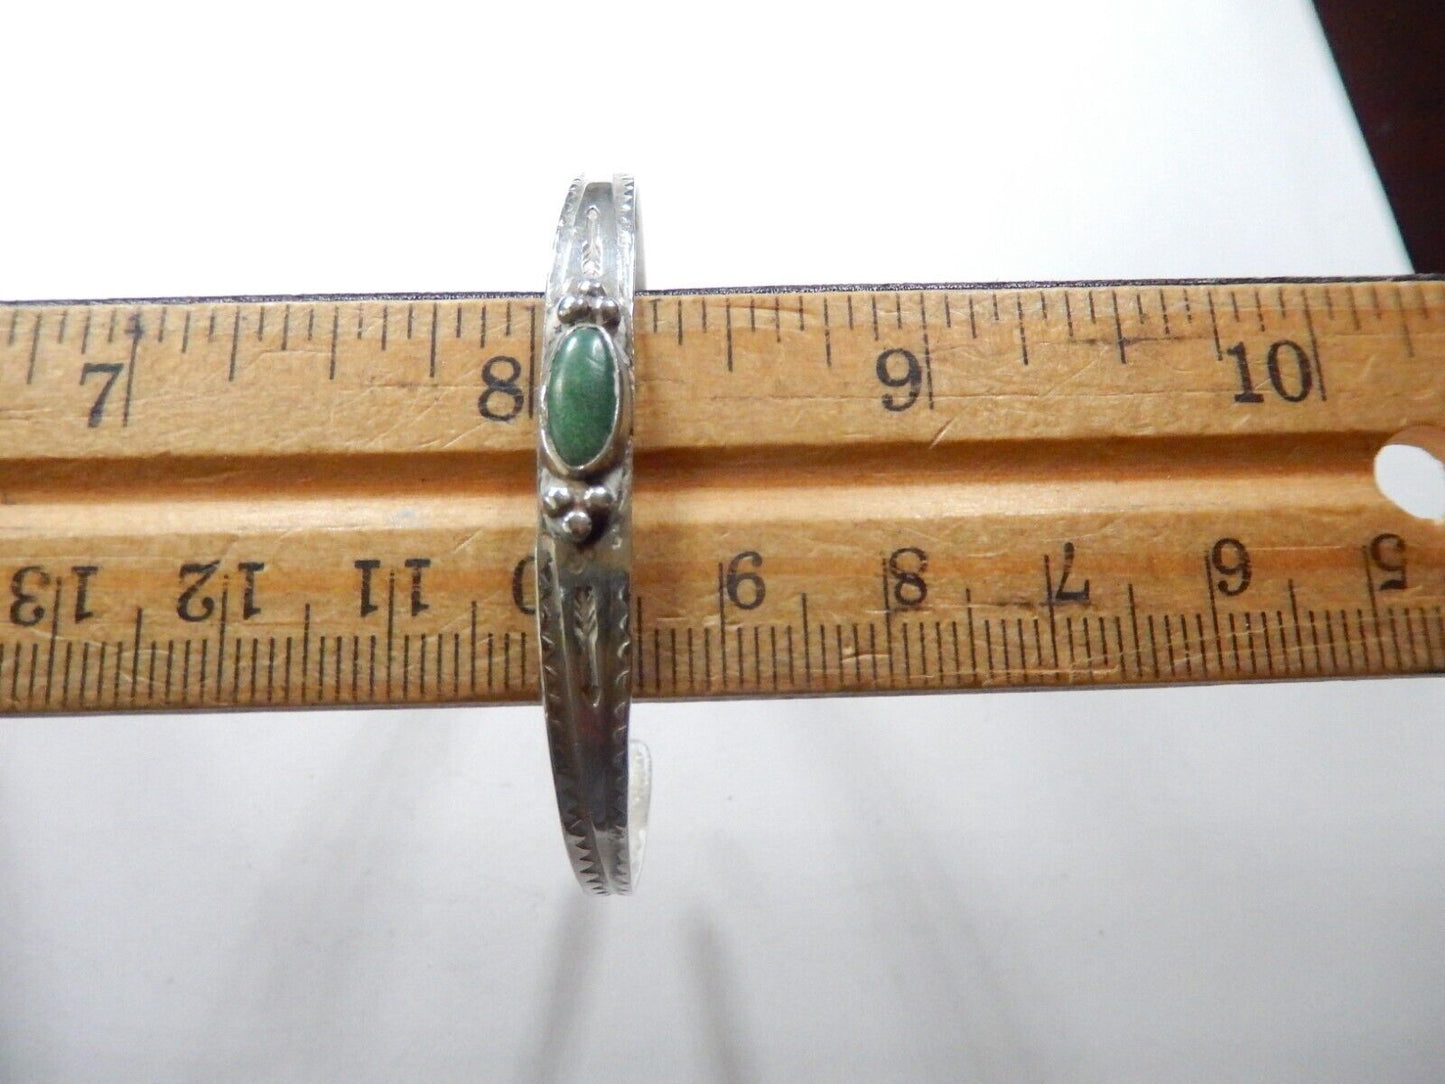 *VINTAGE* Southwestern Sterling Silver And Green Turquoise Small Size Bangle